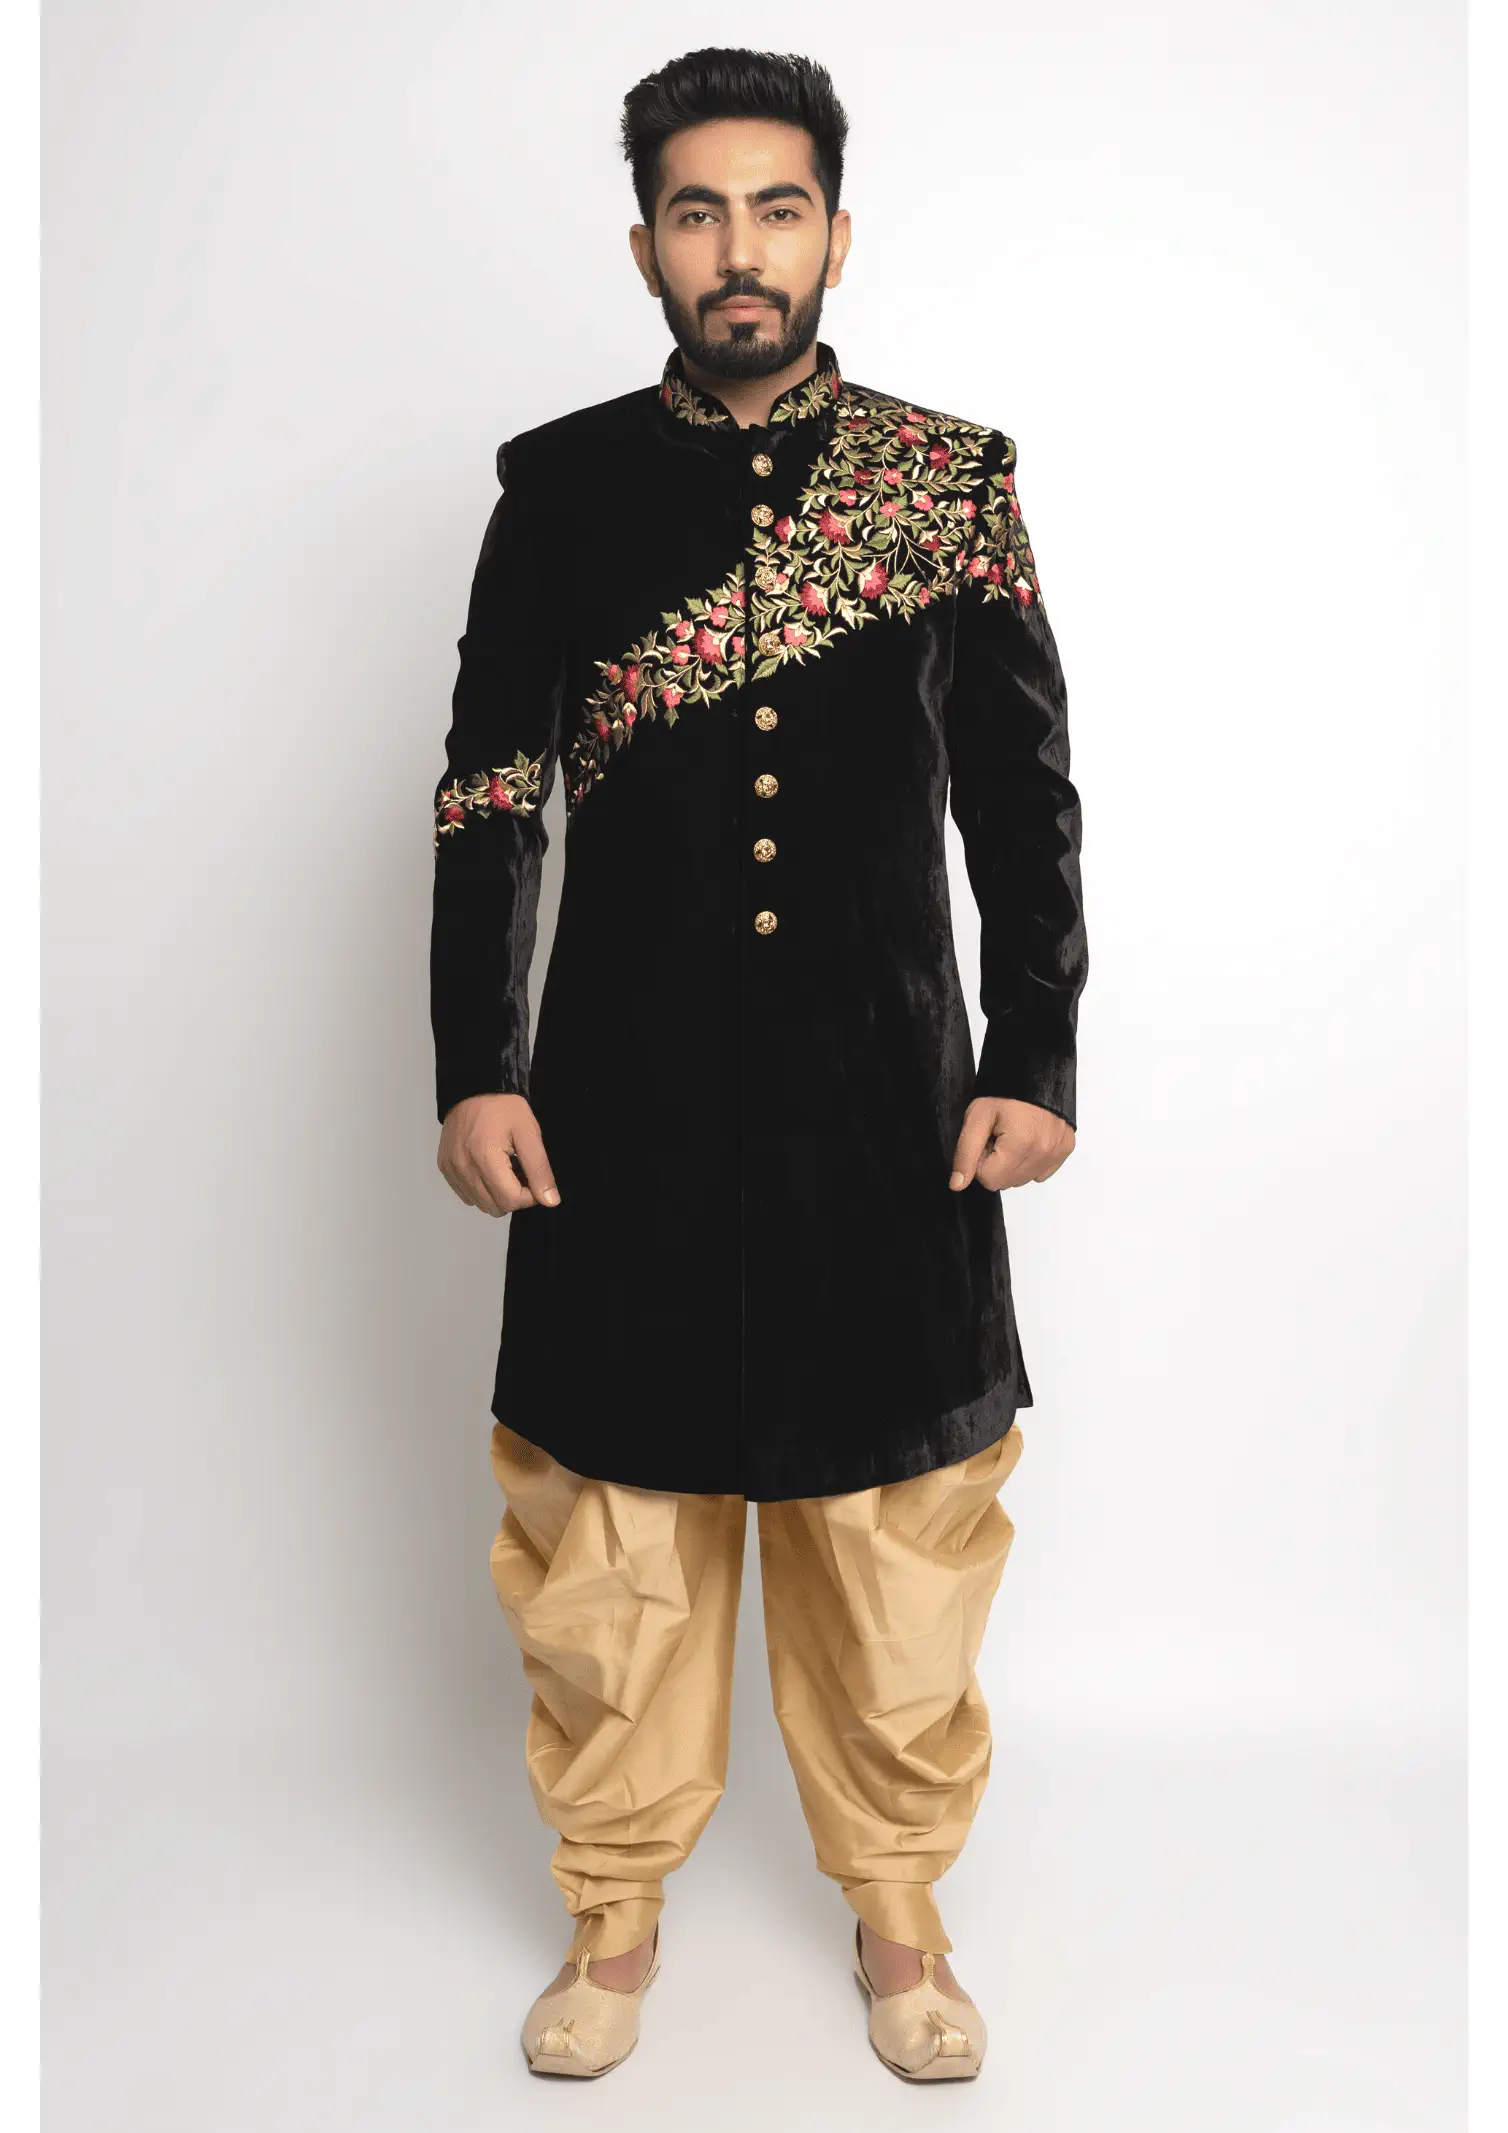 Black & Gold Achkan with intricate Multiple Hued Floral Embroidery